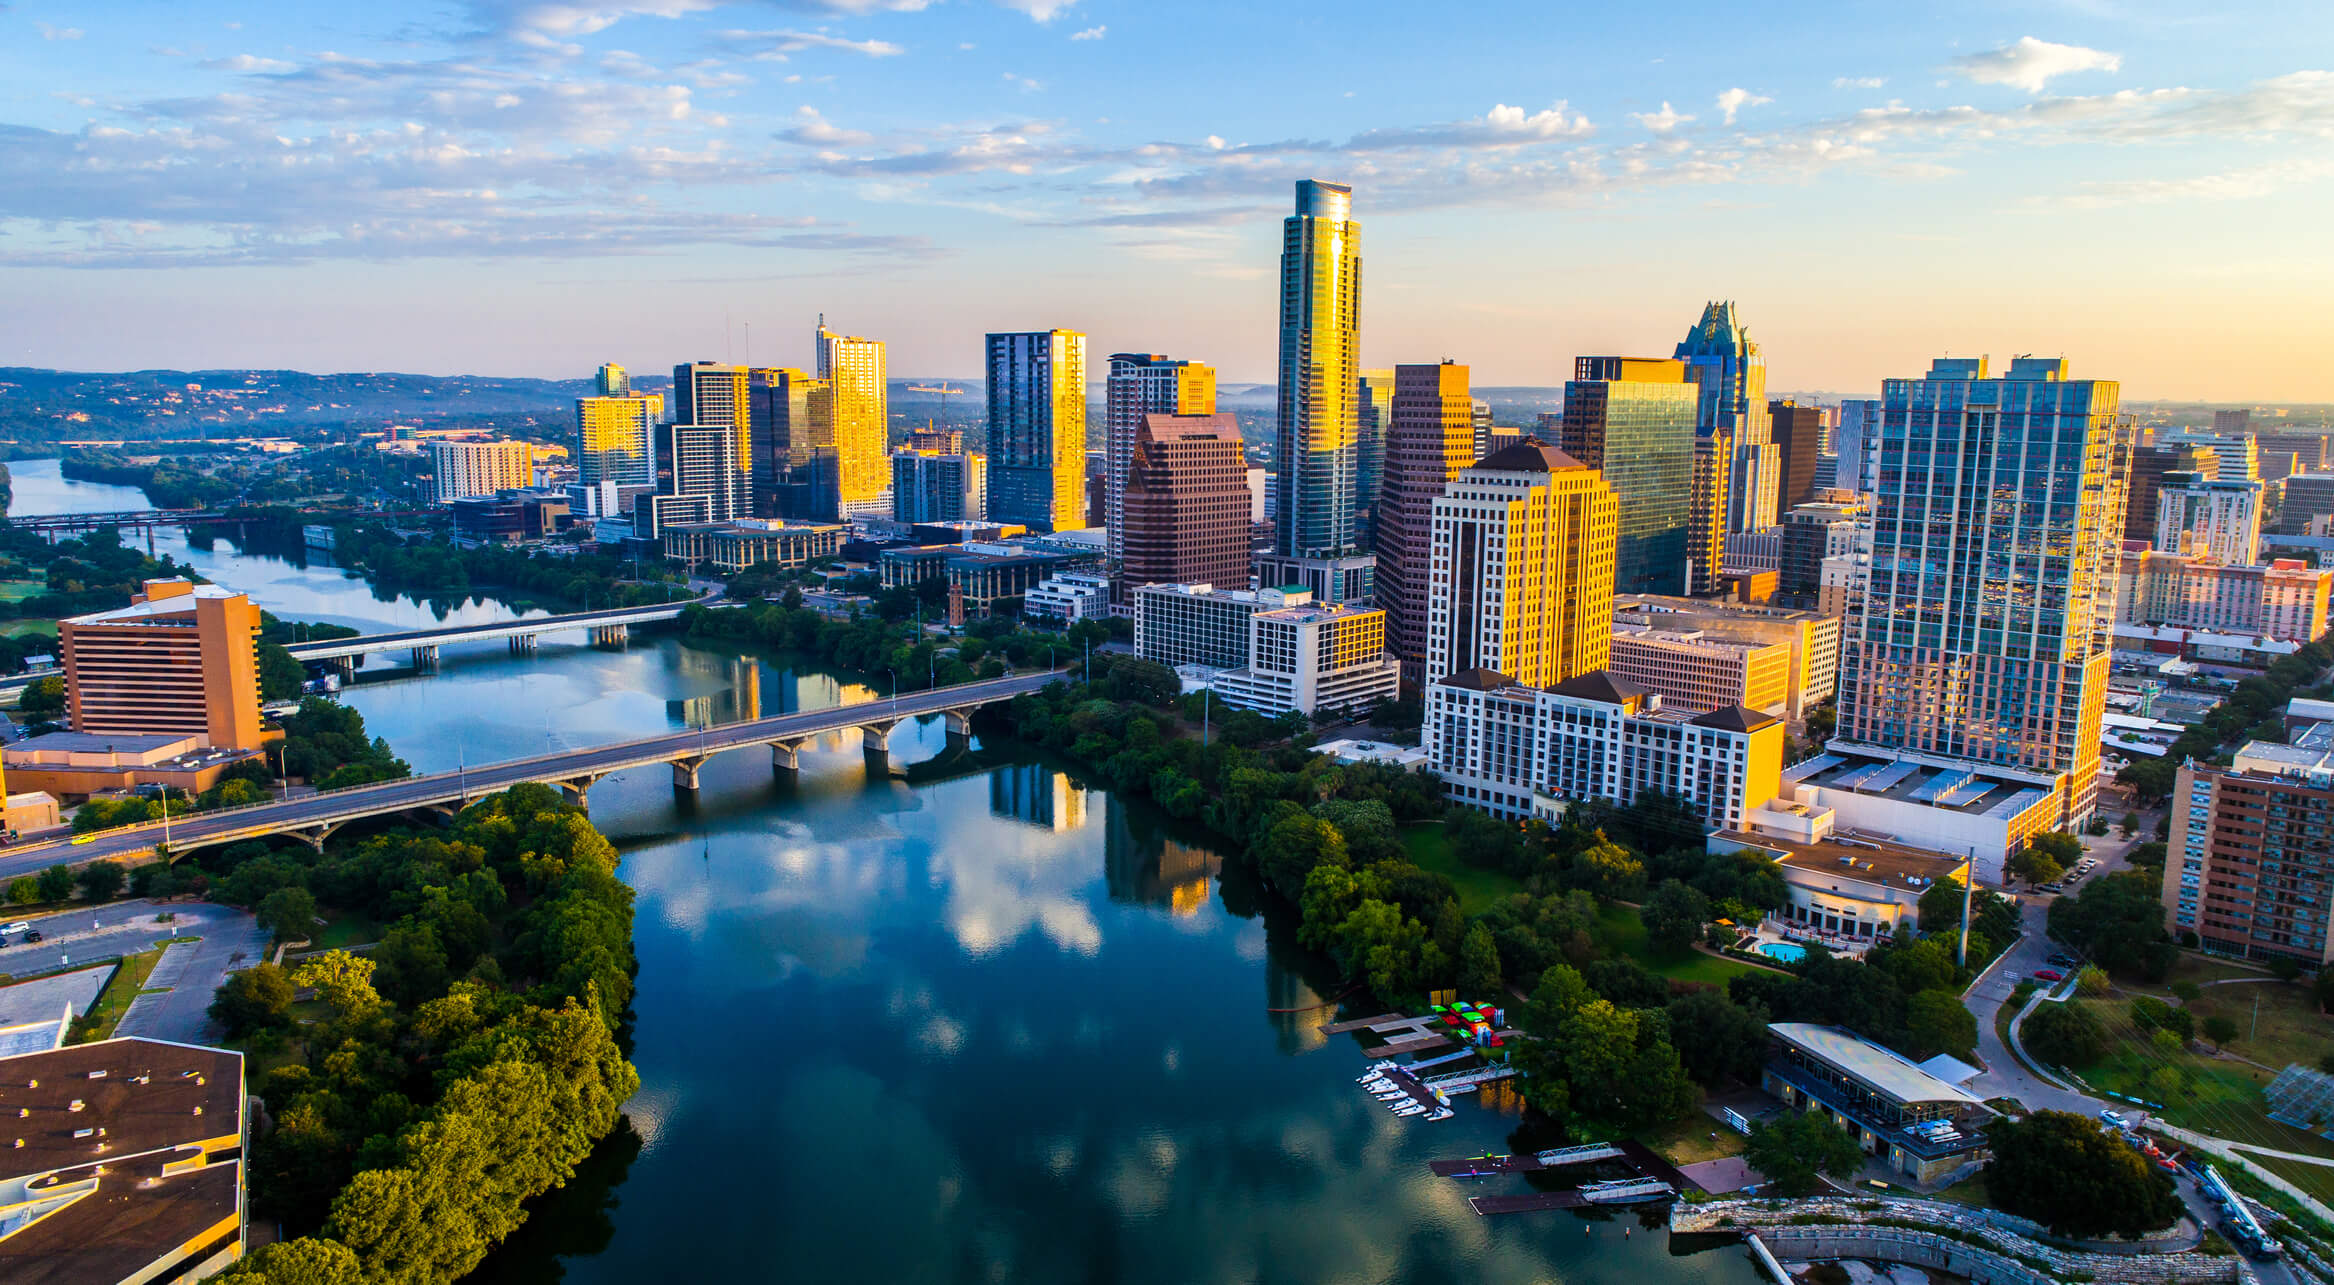 Professional real estate photo of Austin, TX skyline in golden hour